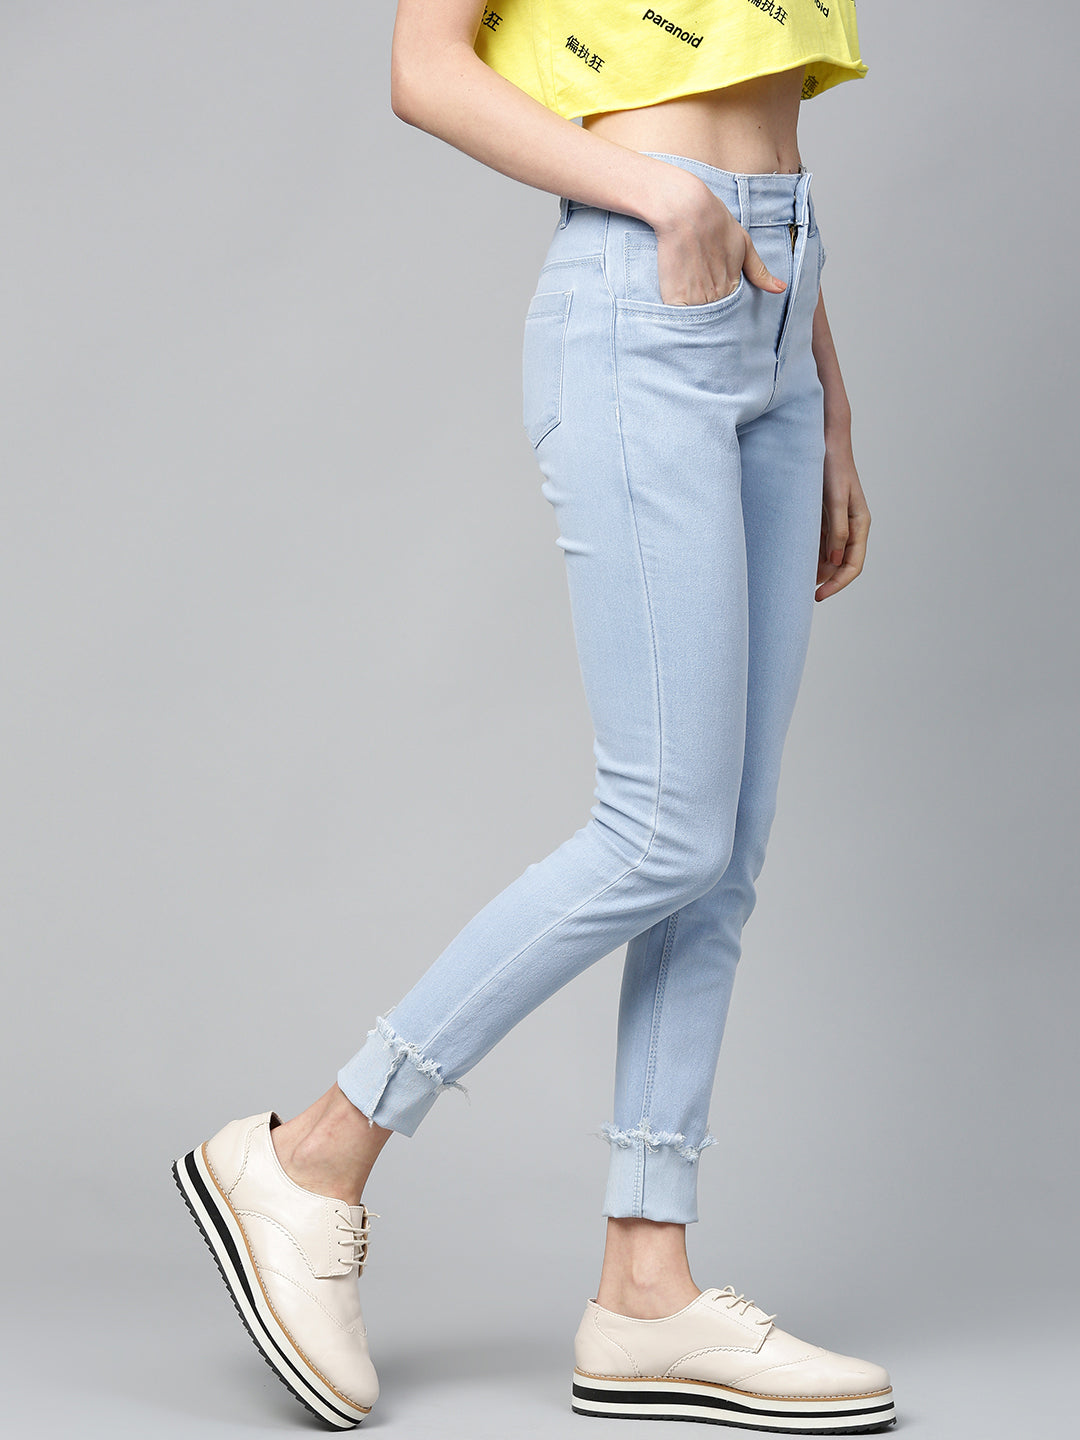 Ice Blue Uneven Raw Basic Jeans